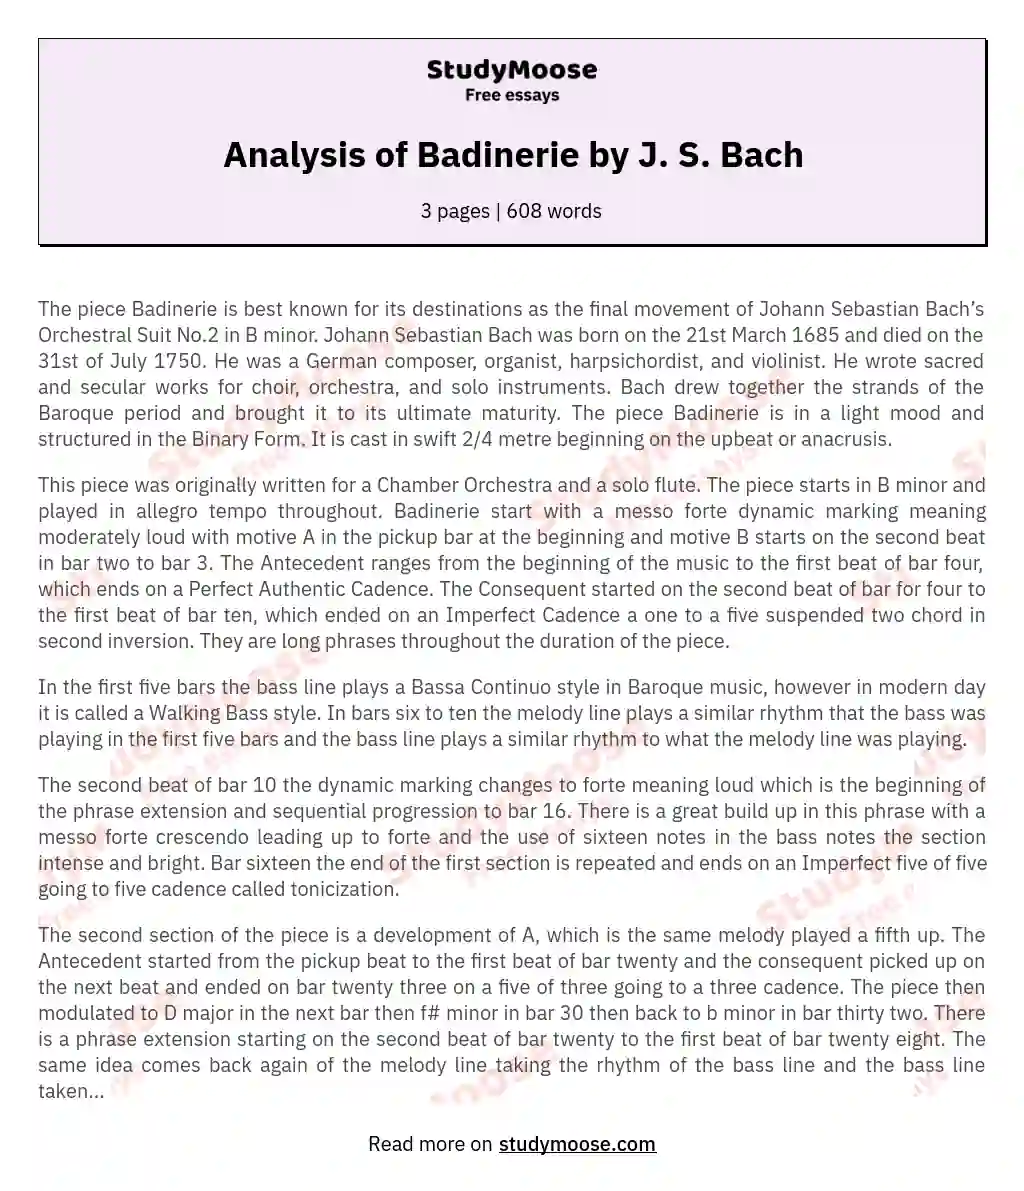 Analysis of Badinerie by J. S. Bach essay